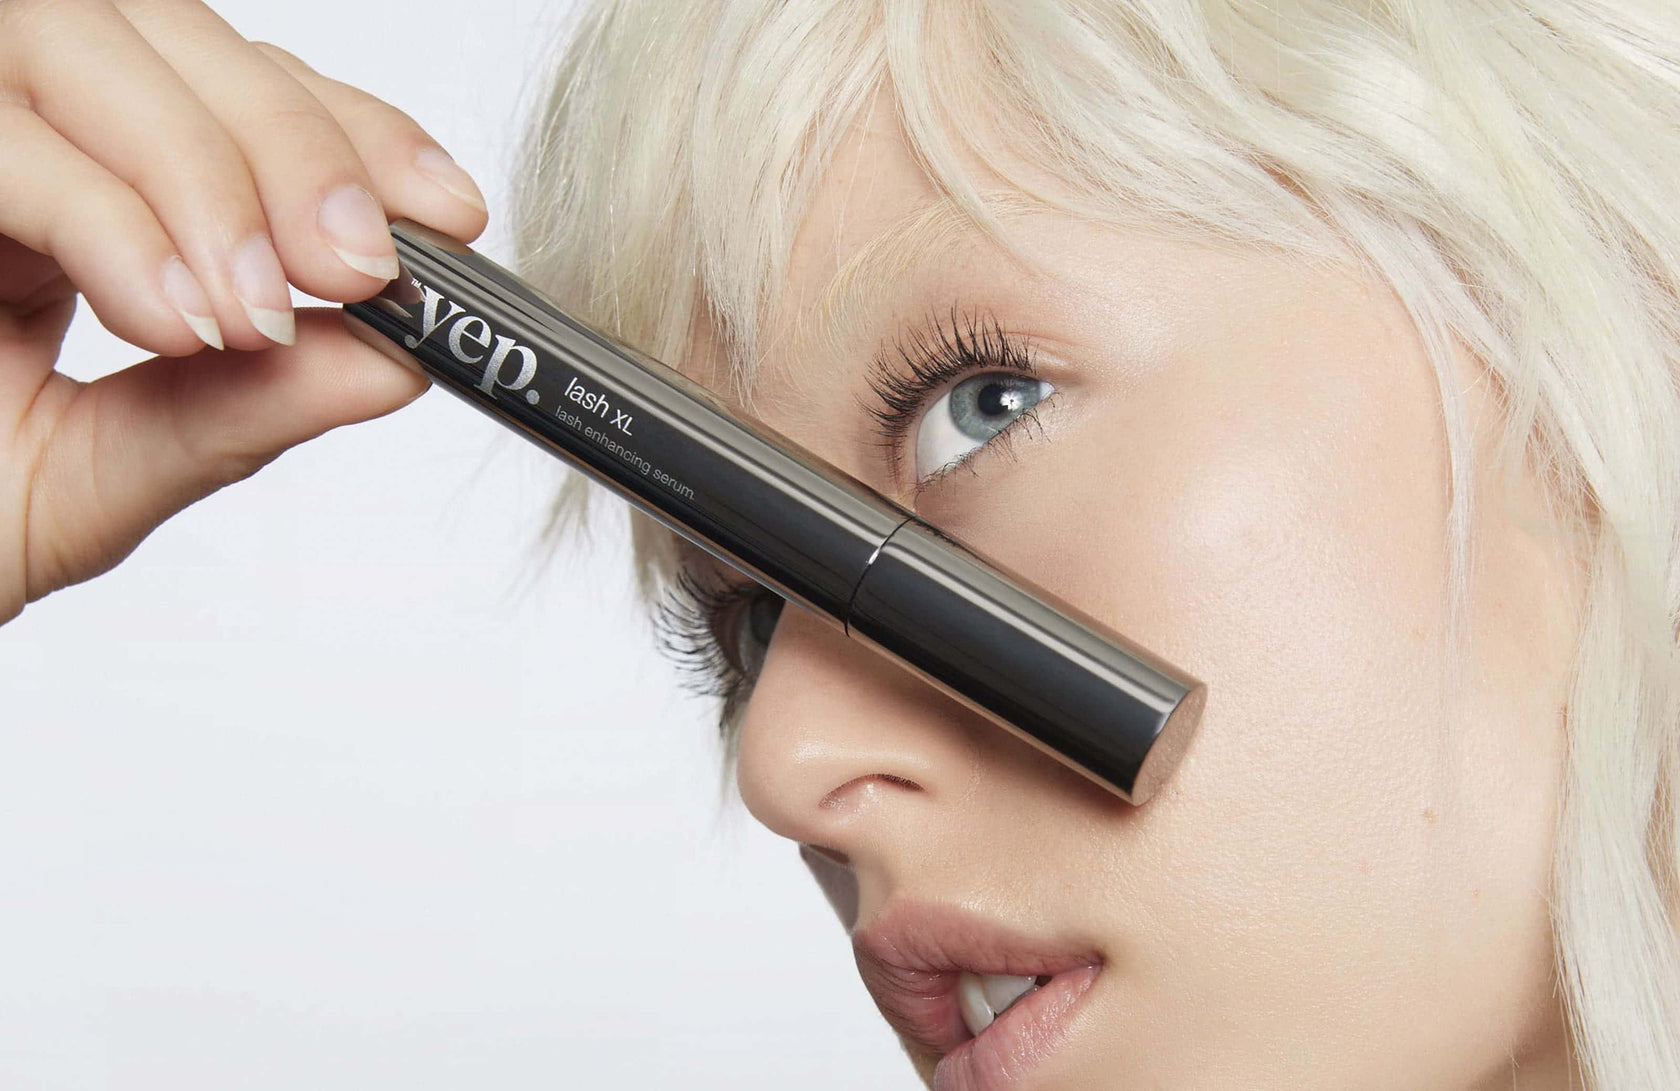 A woman holding an eyelash serum that enhanced her lashes with a fuller, more voluminous look.